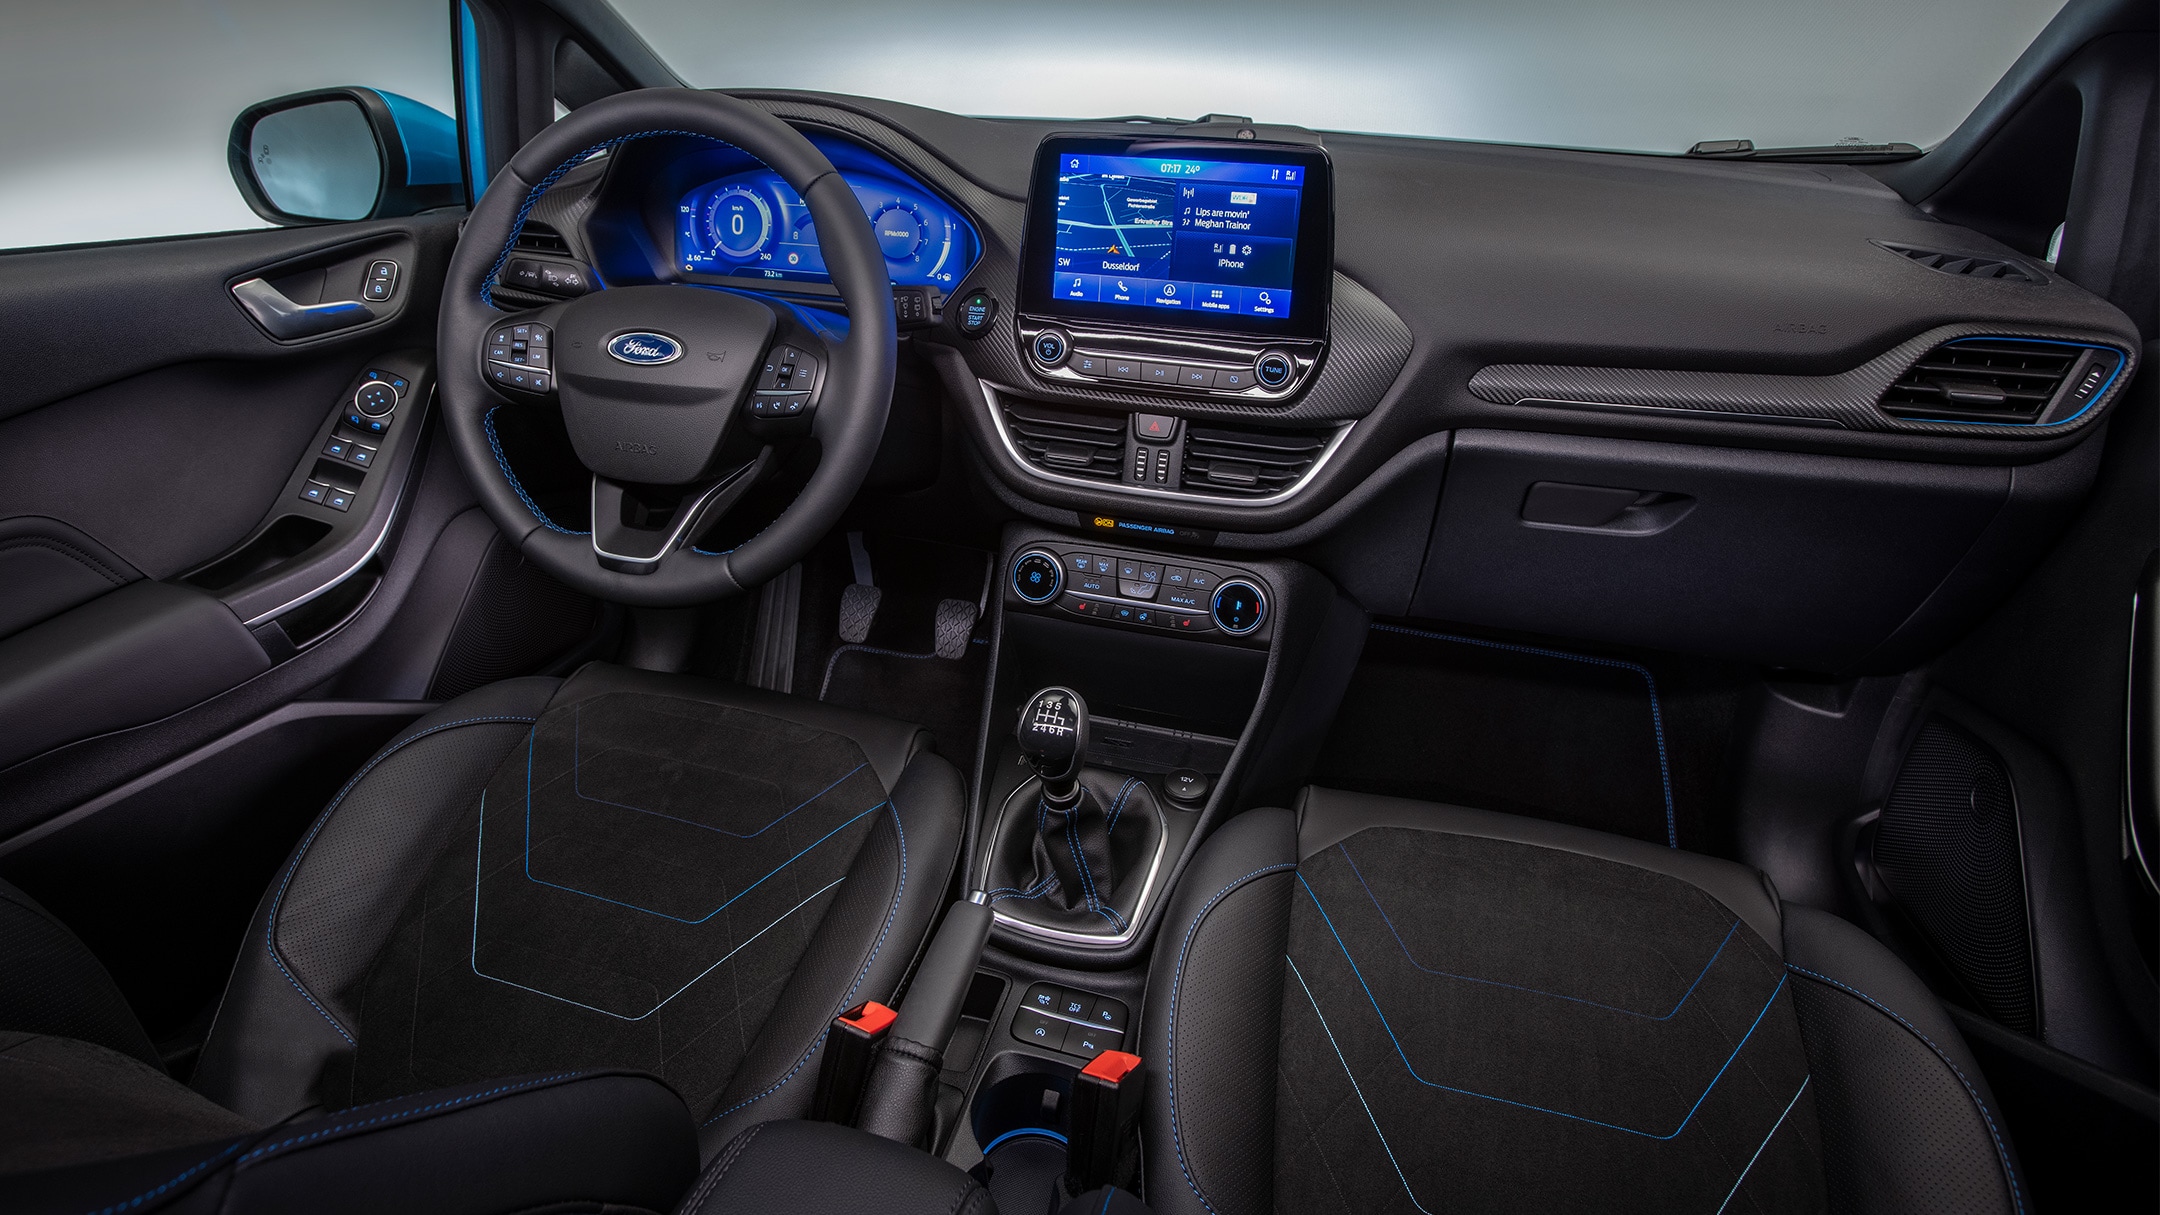 Ford Fiesta showing active interior